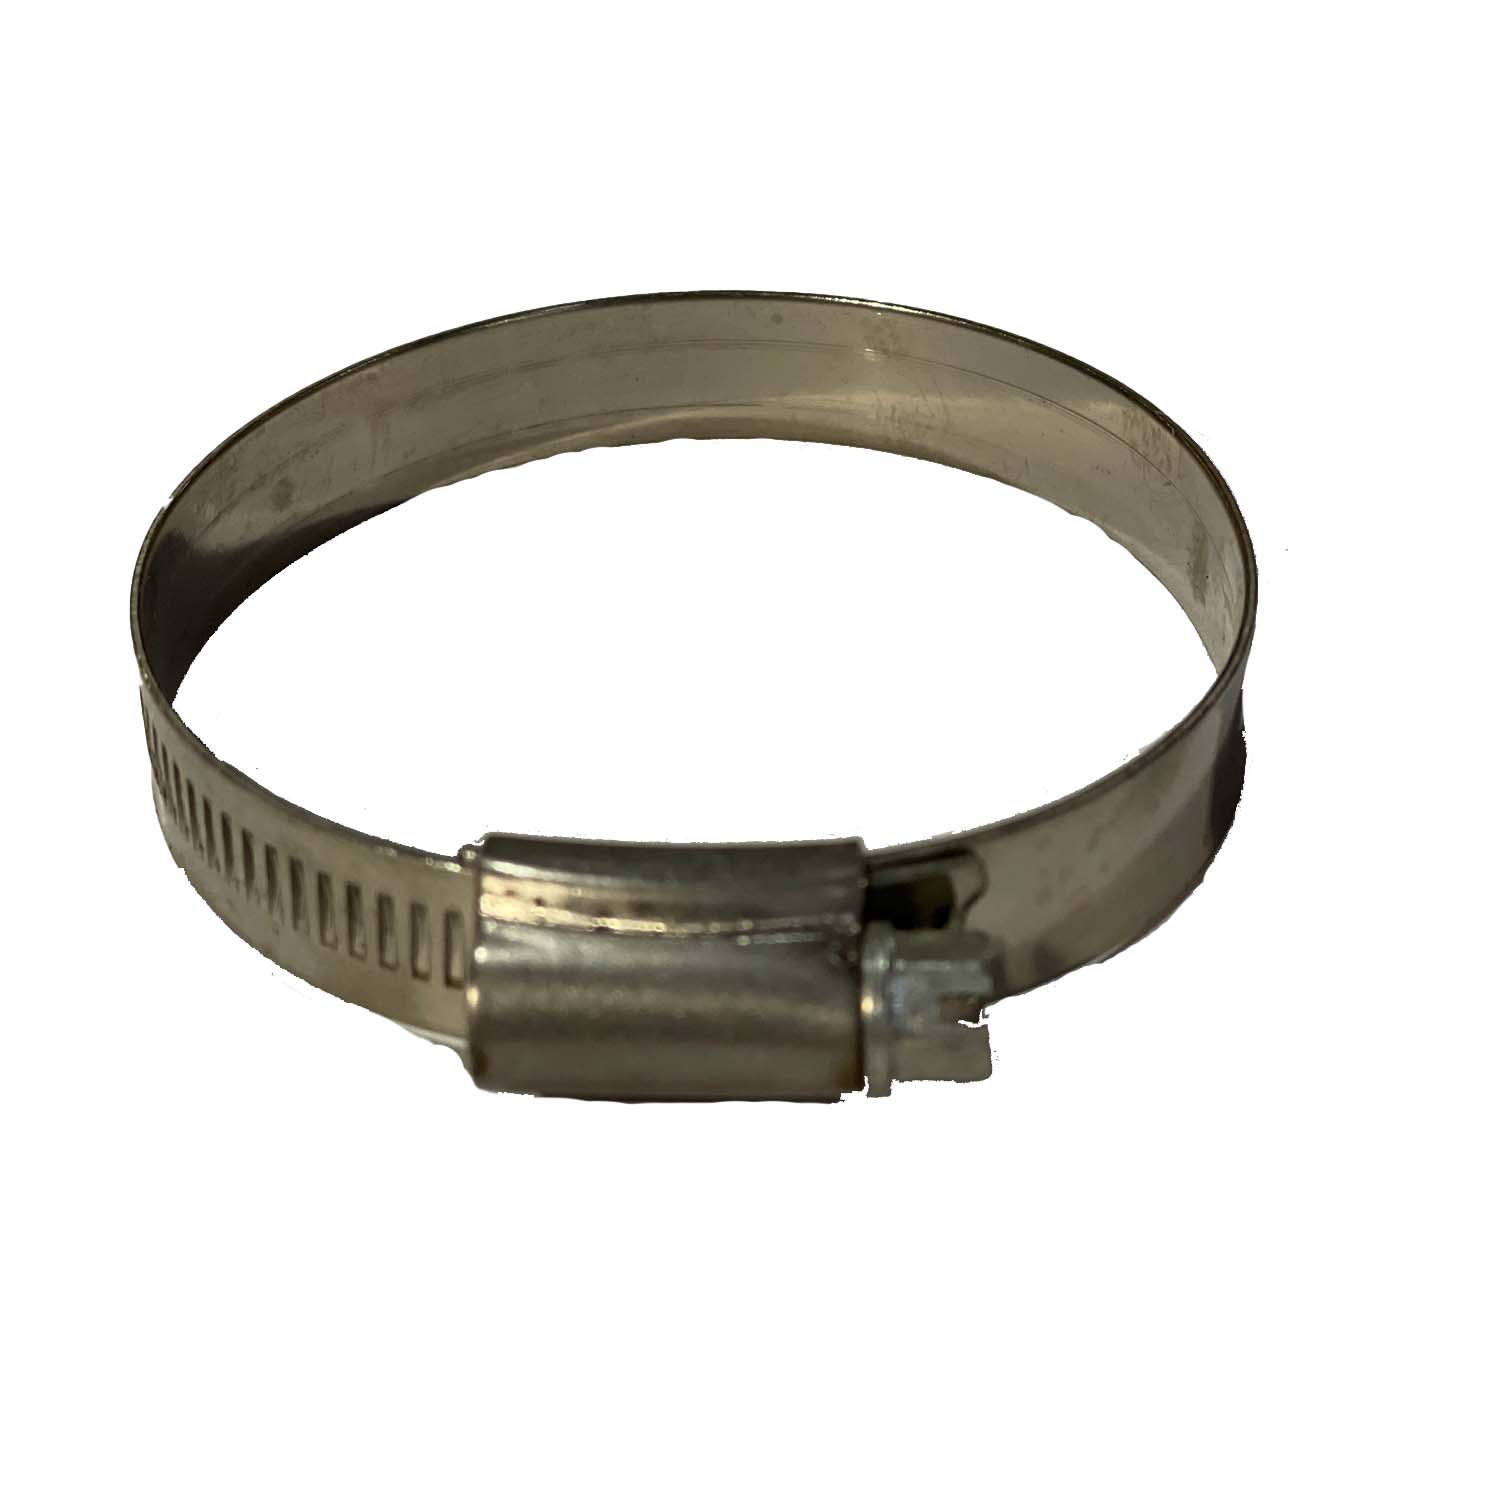 Hose Screw Clamp for Gutter Pro Vac